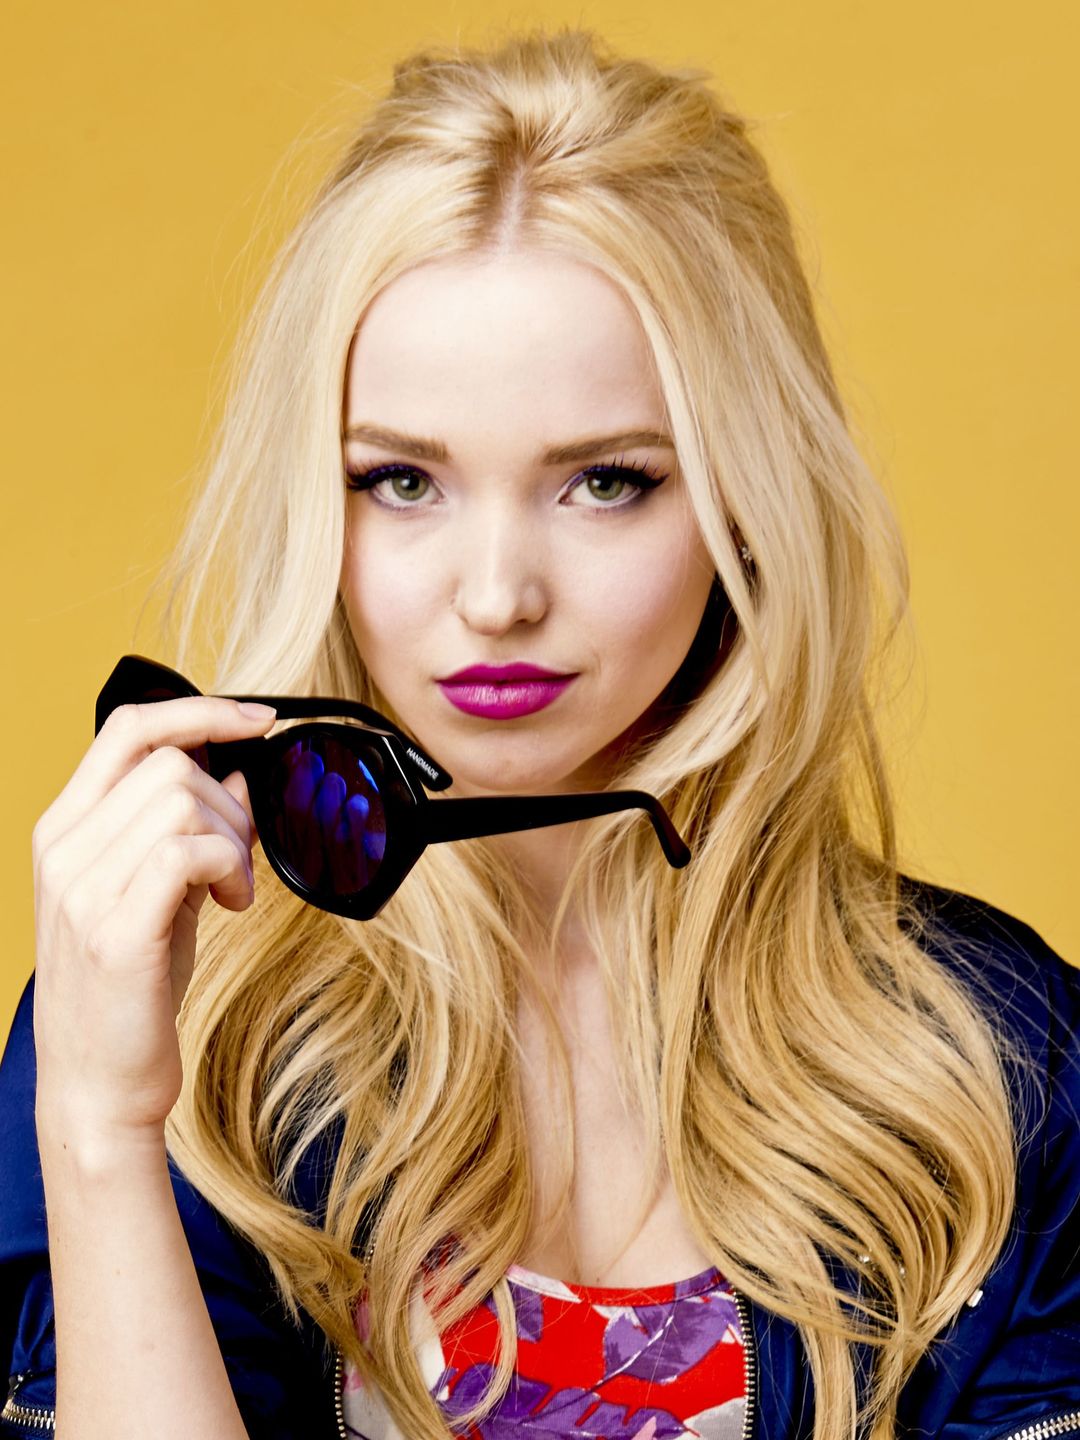 Dove Cameron young age